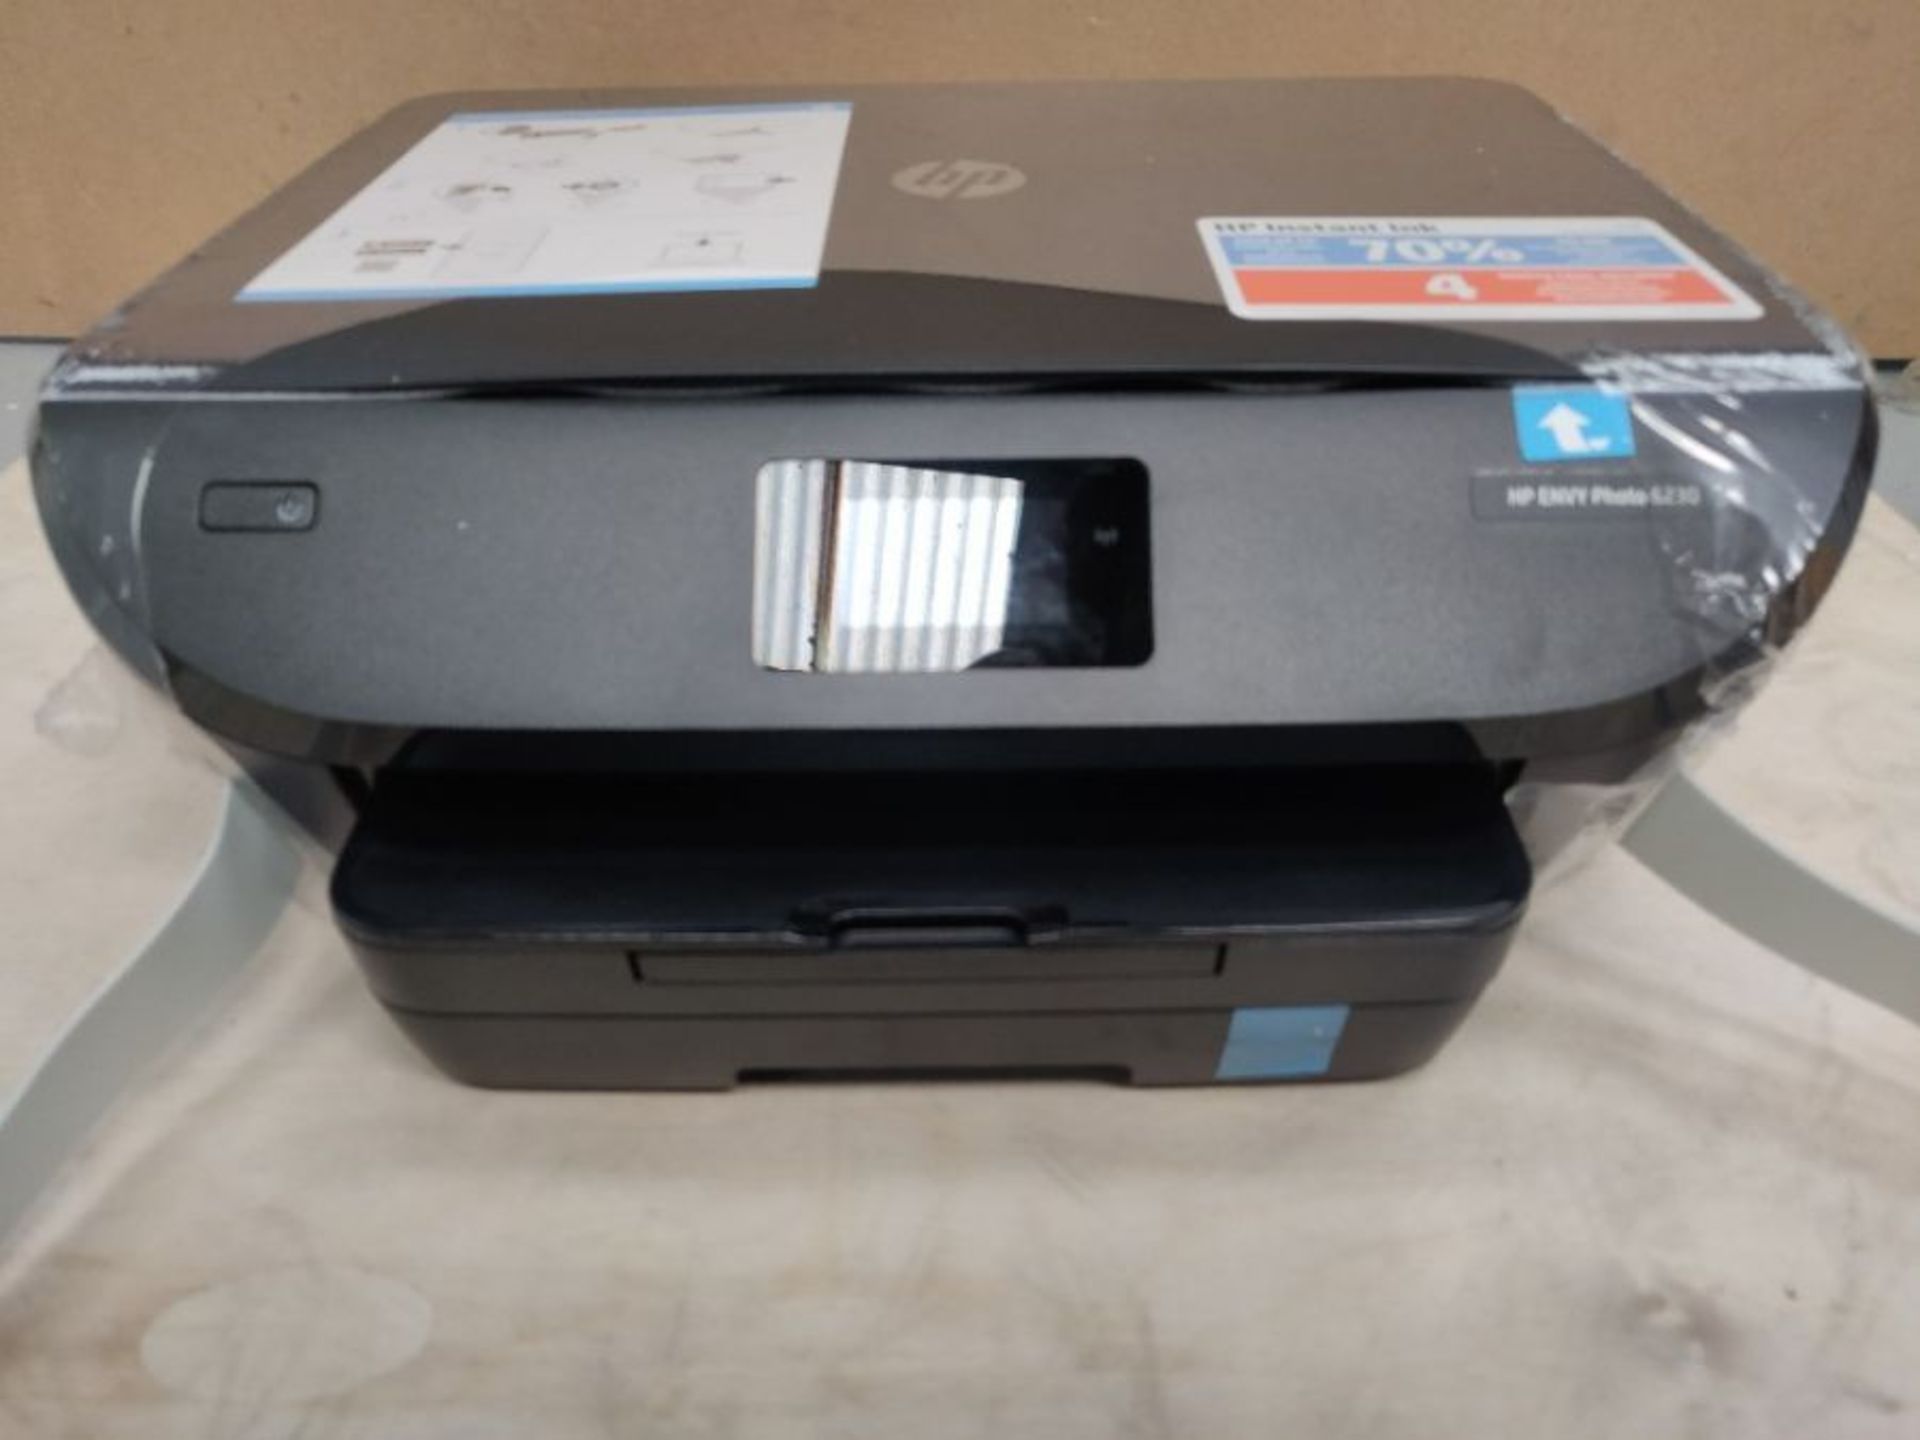 RRP £80.00 HP Envy Photo 6230 All-in-One Wi-Fi Photo Printer with 4 Months of Instant Ink Include - Image 3 of 3